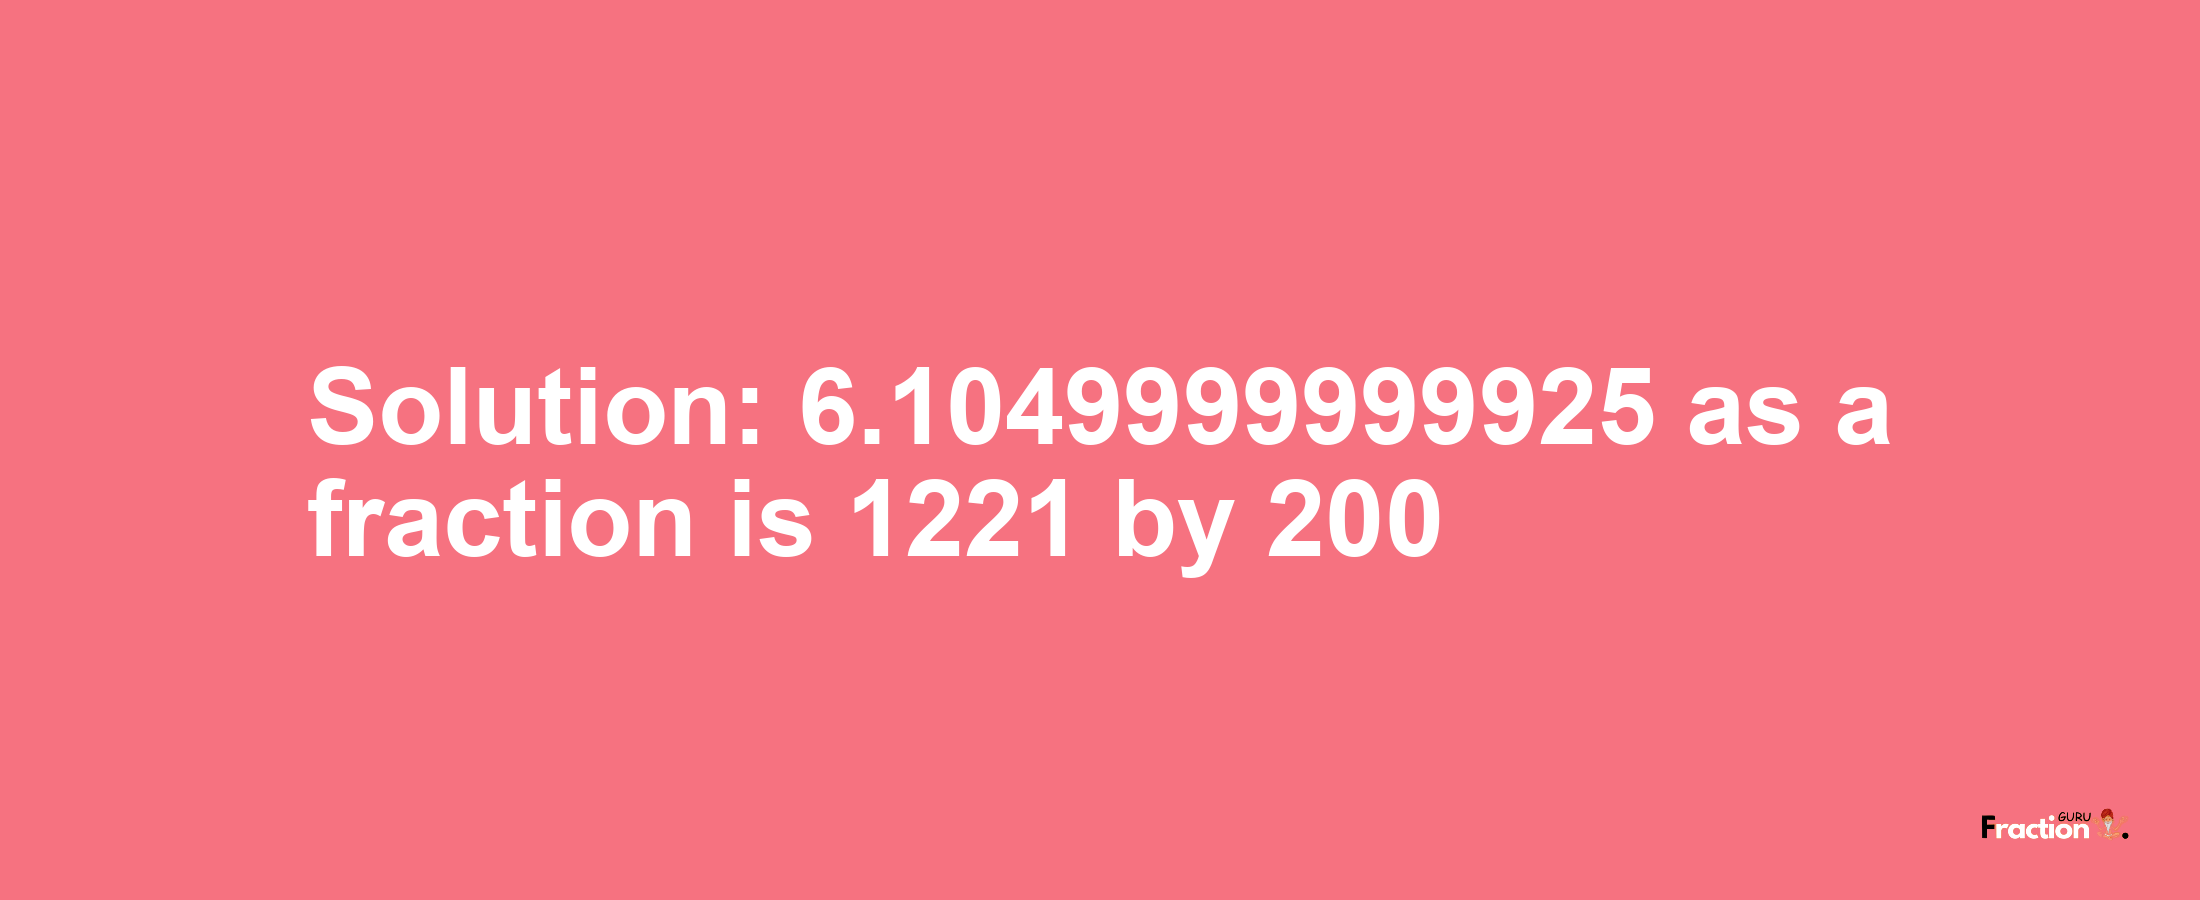 Solution:6.1049999999925 as a fraction is 1221/200